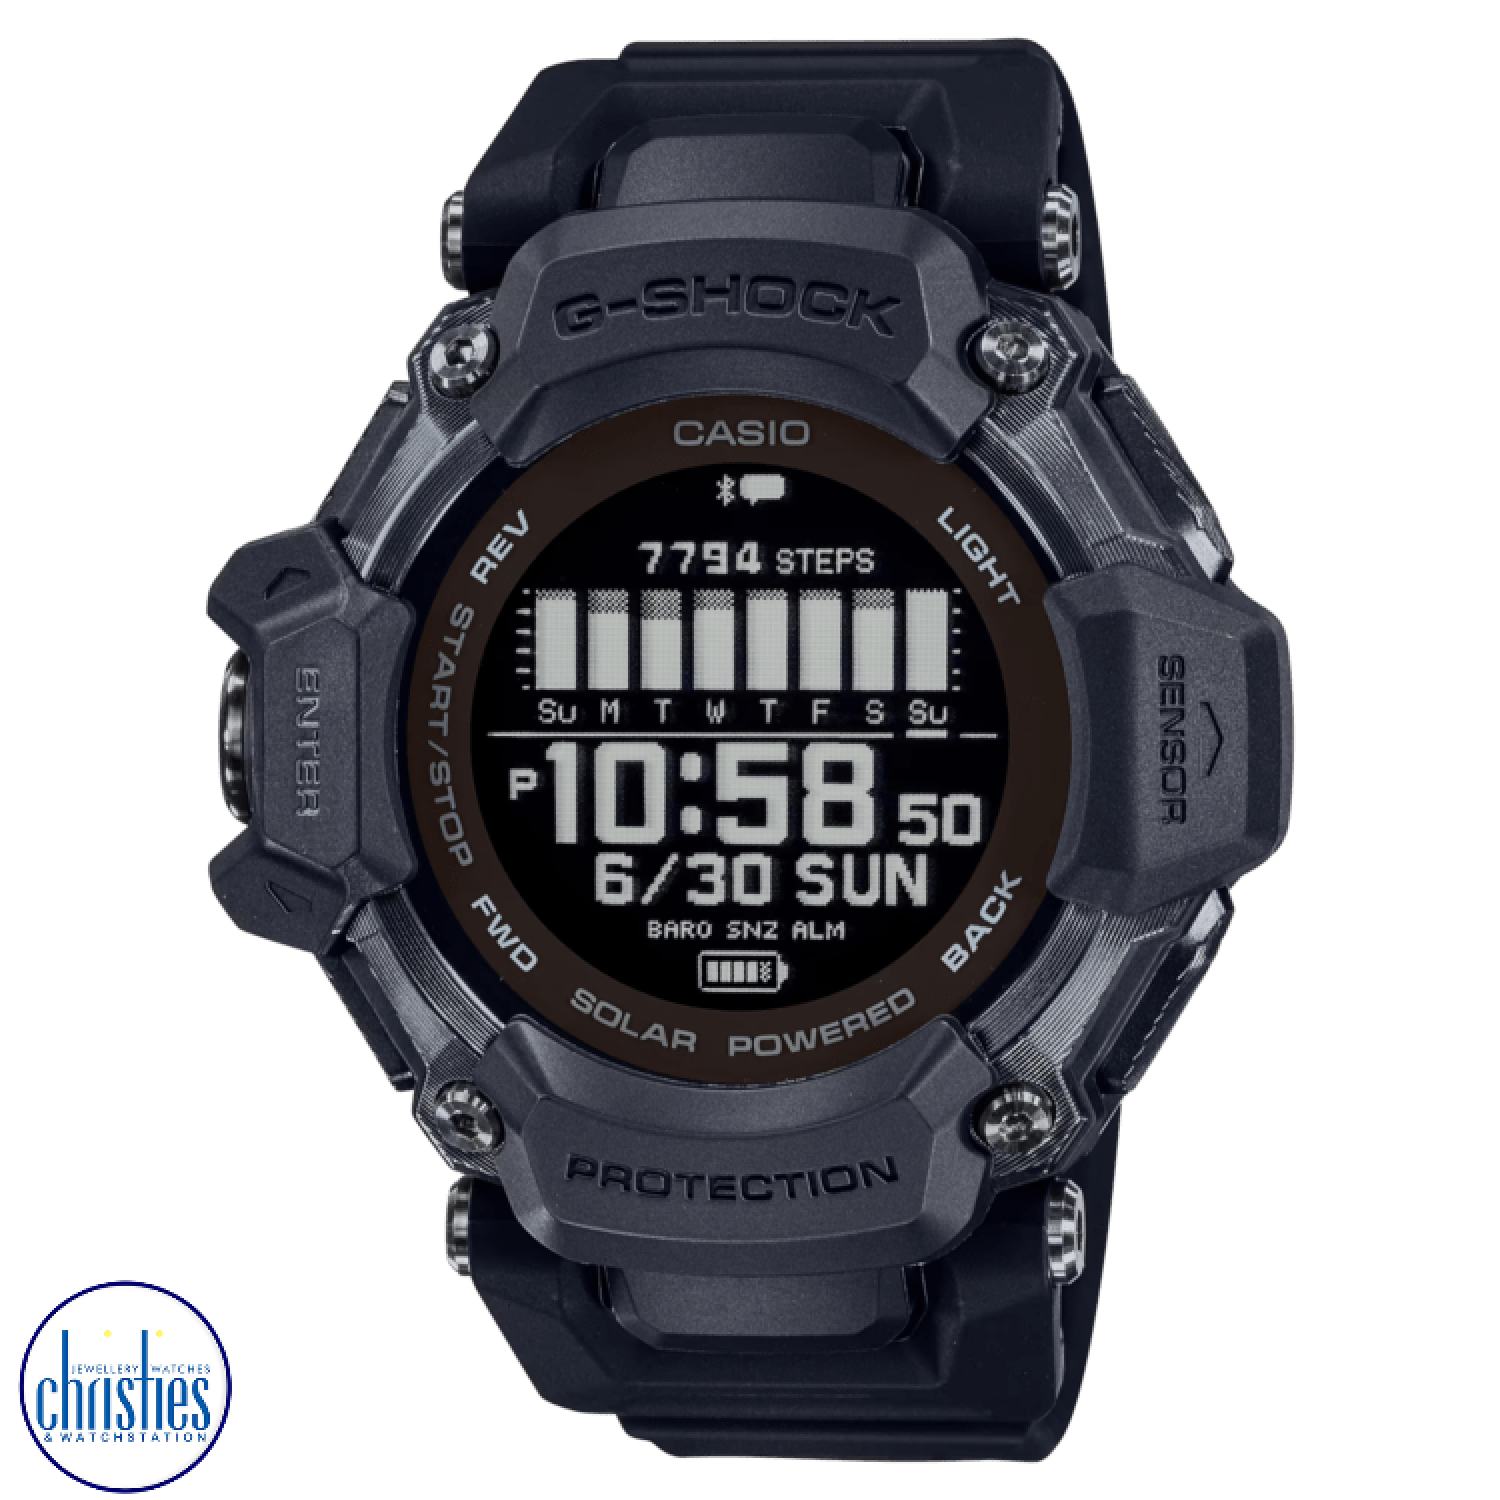 GBDH2000-1B G-Shock G-SQUAD GPS Sports Watch. Christies are excited to announce the launch of the GBD-H2000, the newest addition to the G-SQUAD series of watches.